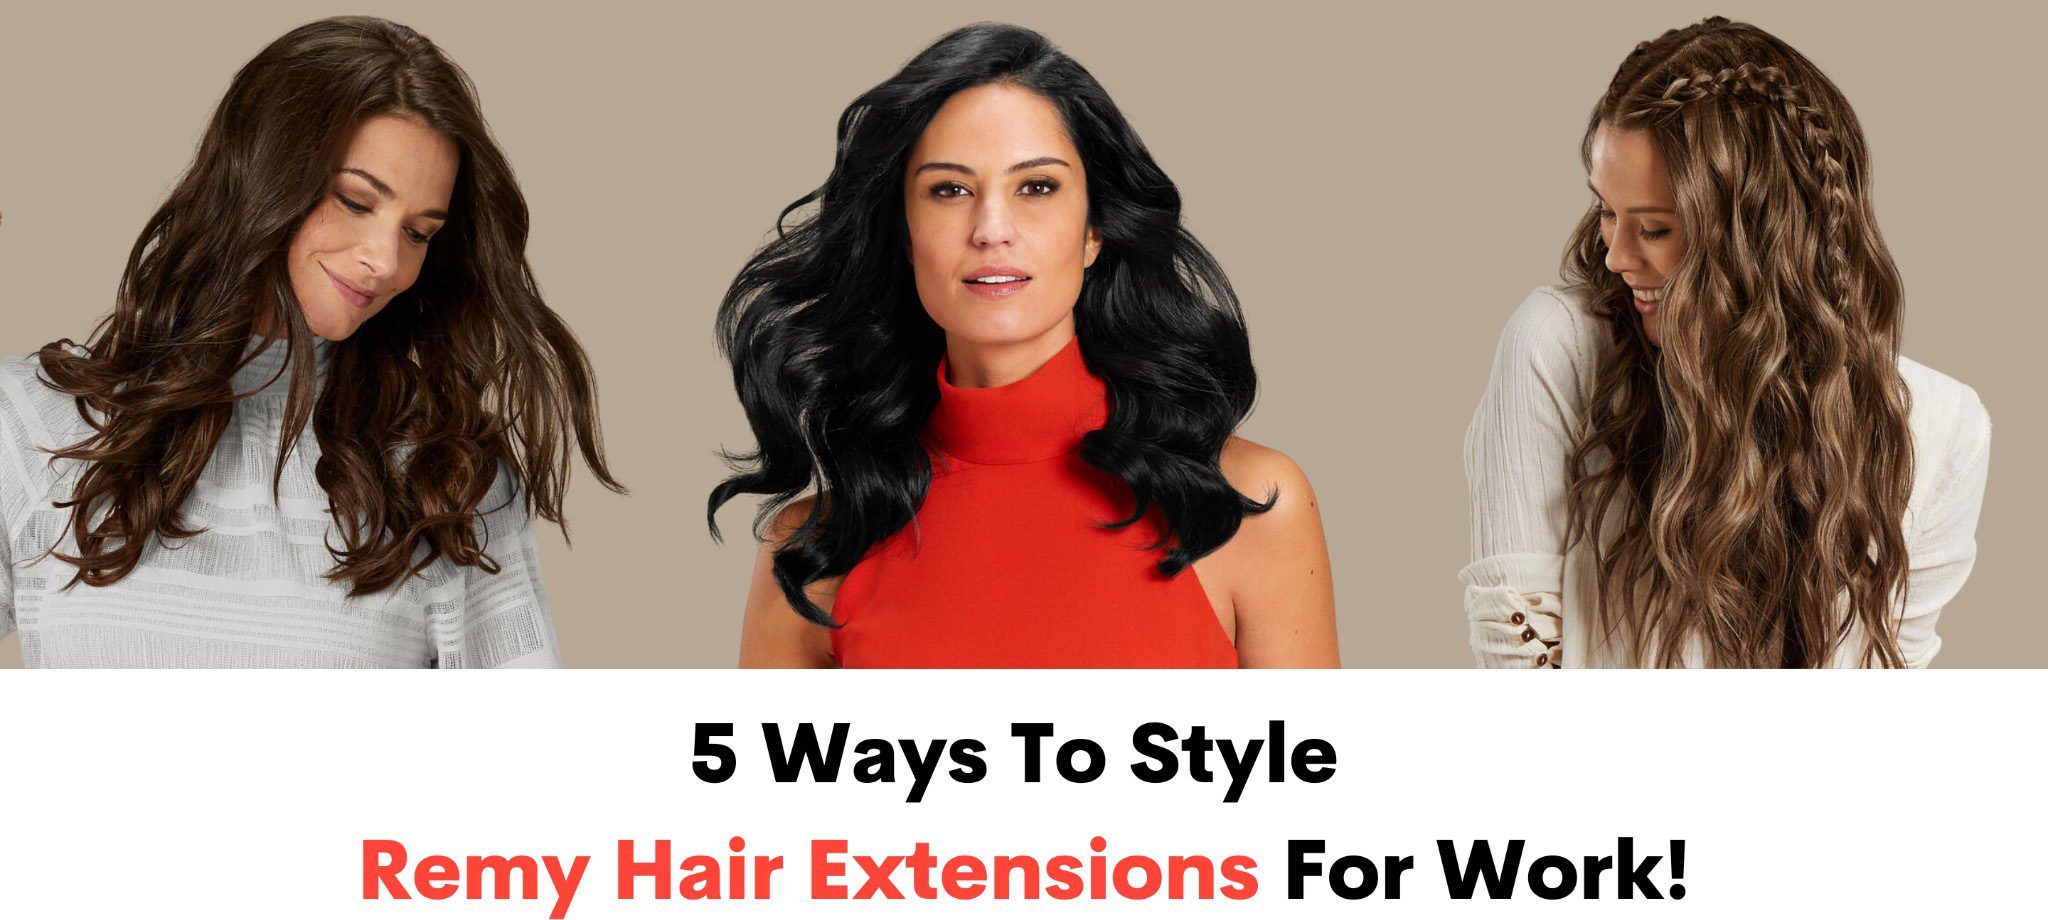 5 Ways To Style Remy Hair Extensions For Work!